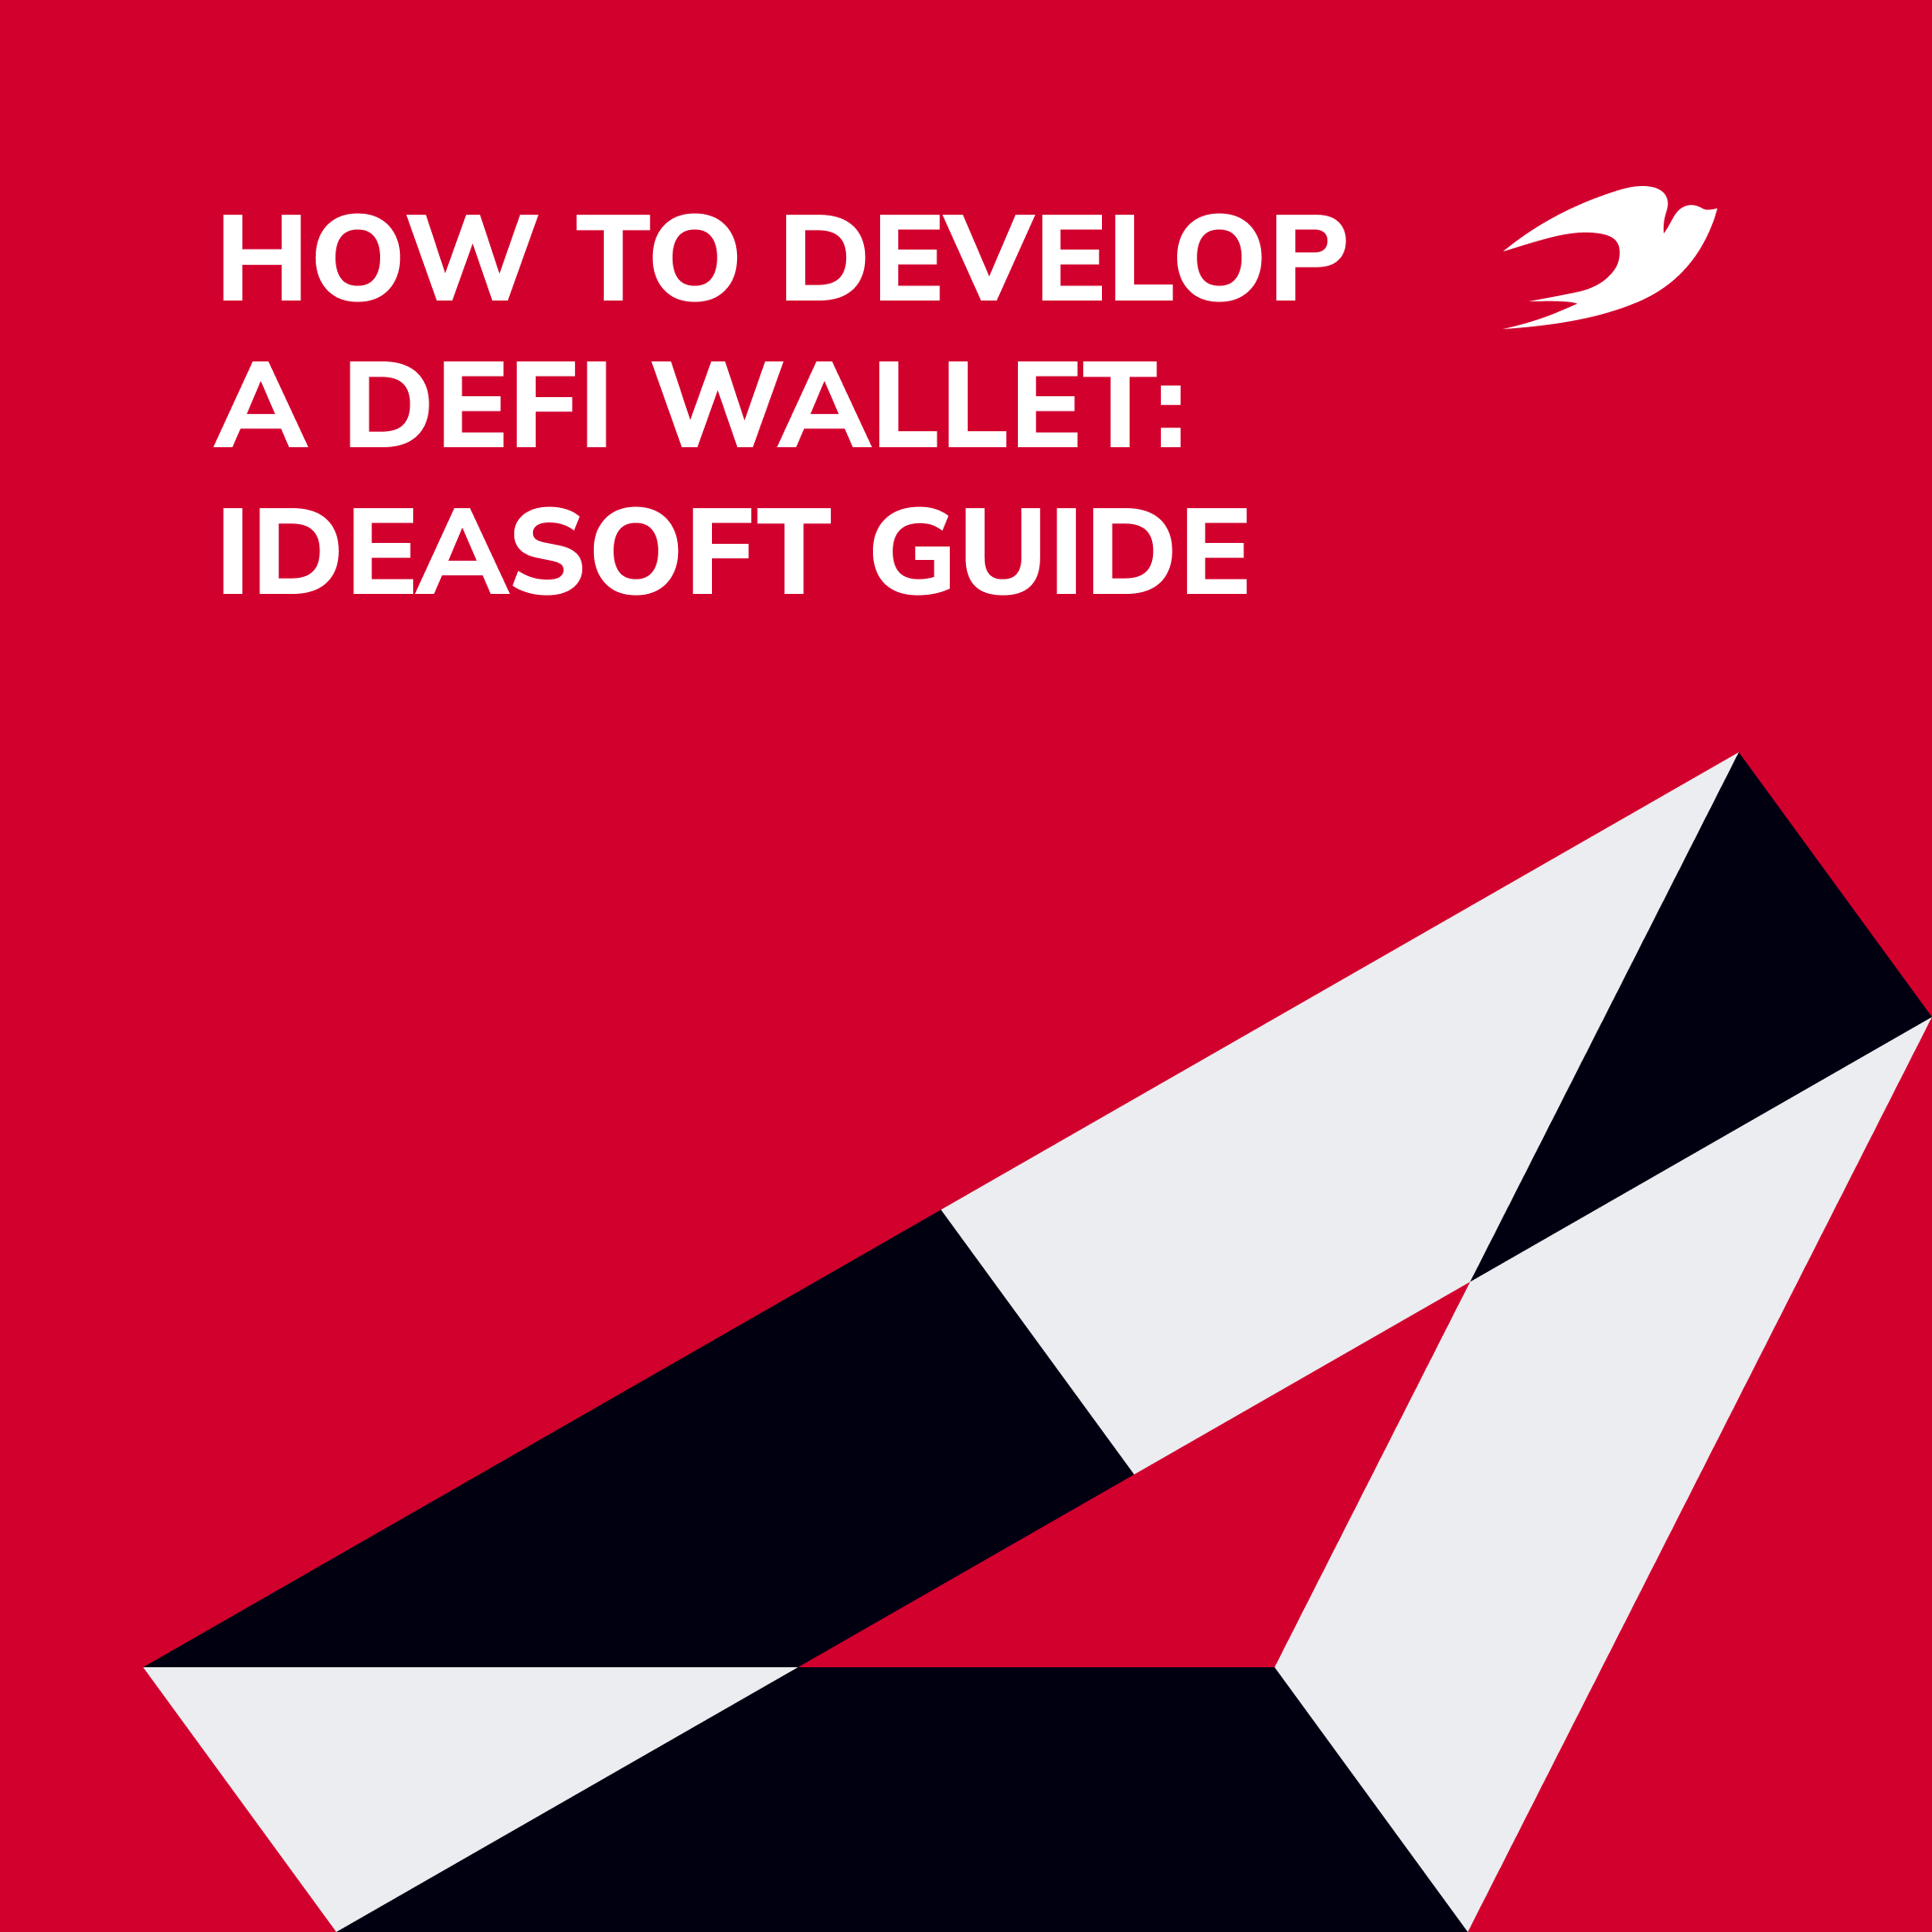 How to Develop a DeFi Wallet: IdeaSoft Guide